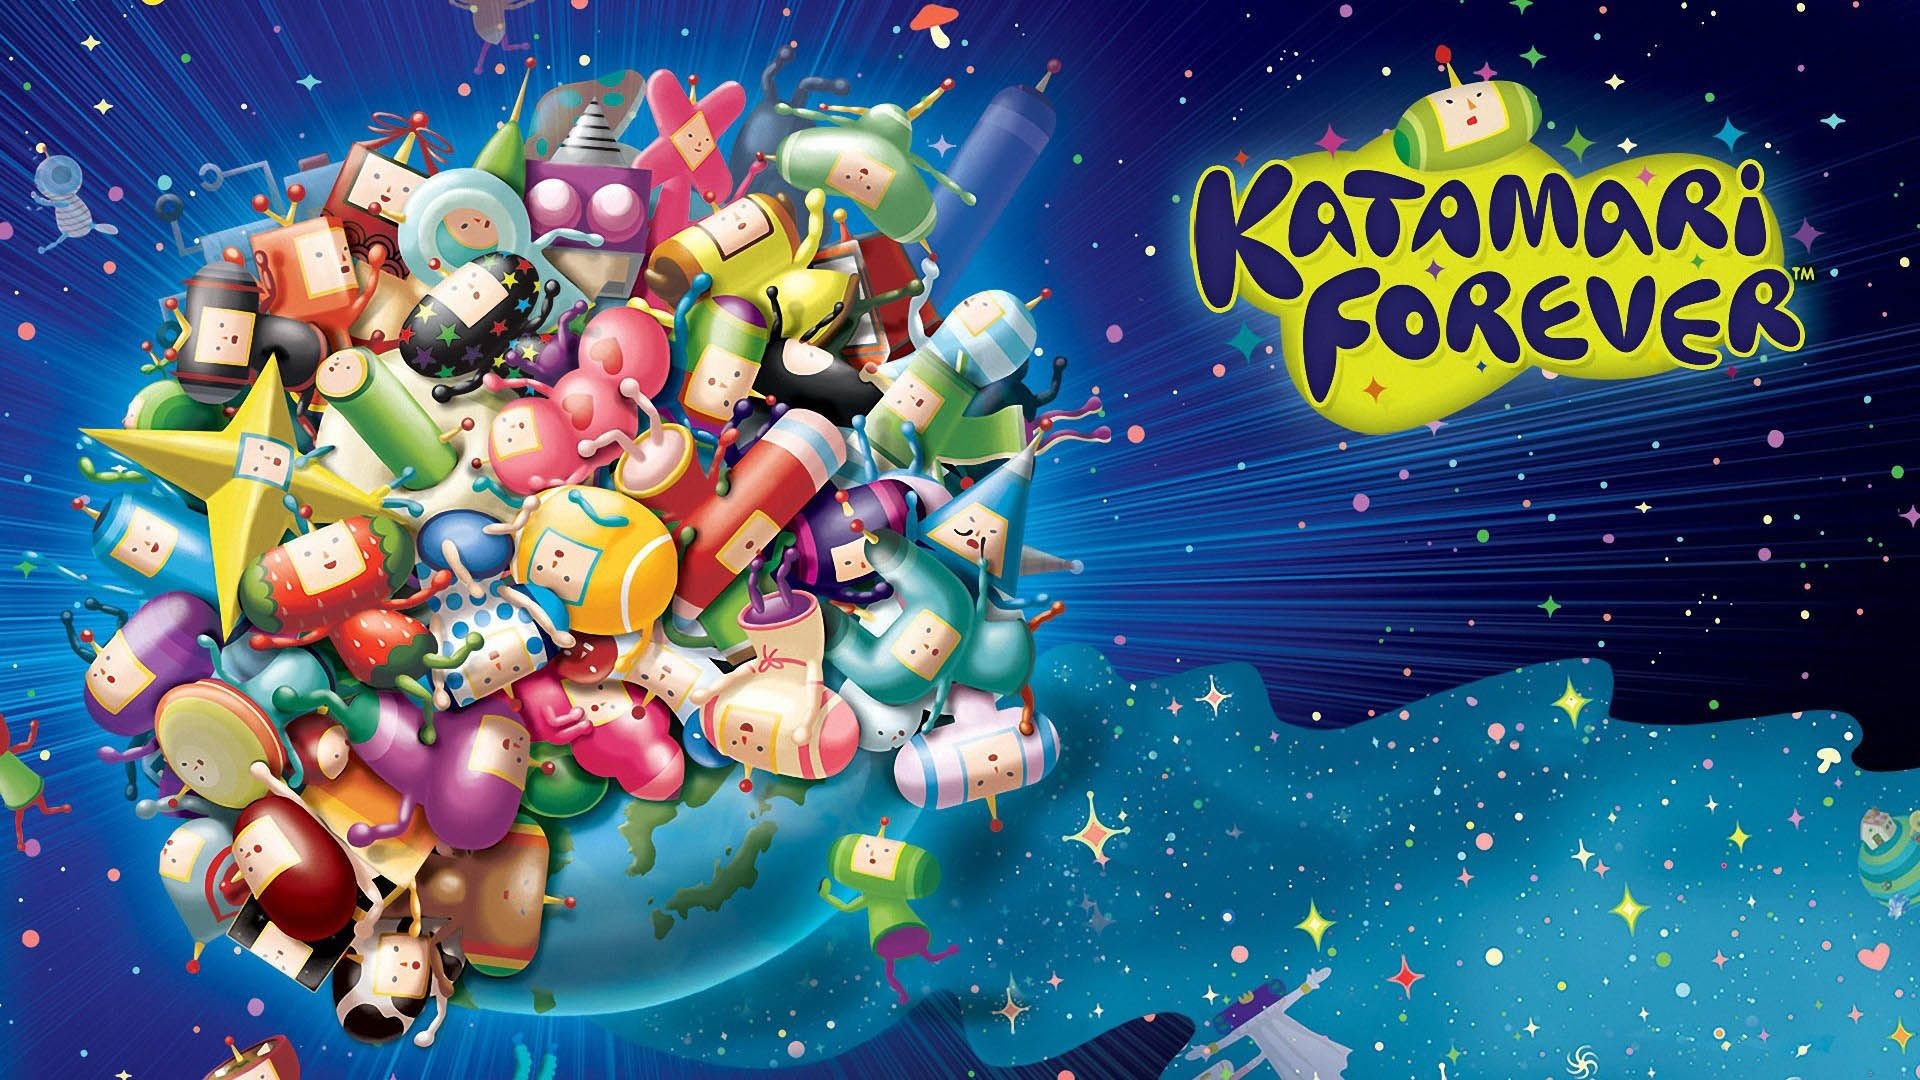 1920x1080 ps3 Wallpapers 1280x1024, Katamari Damacy, Videogames, Cosmos, Daddy,  Gaming, Outer